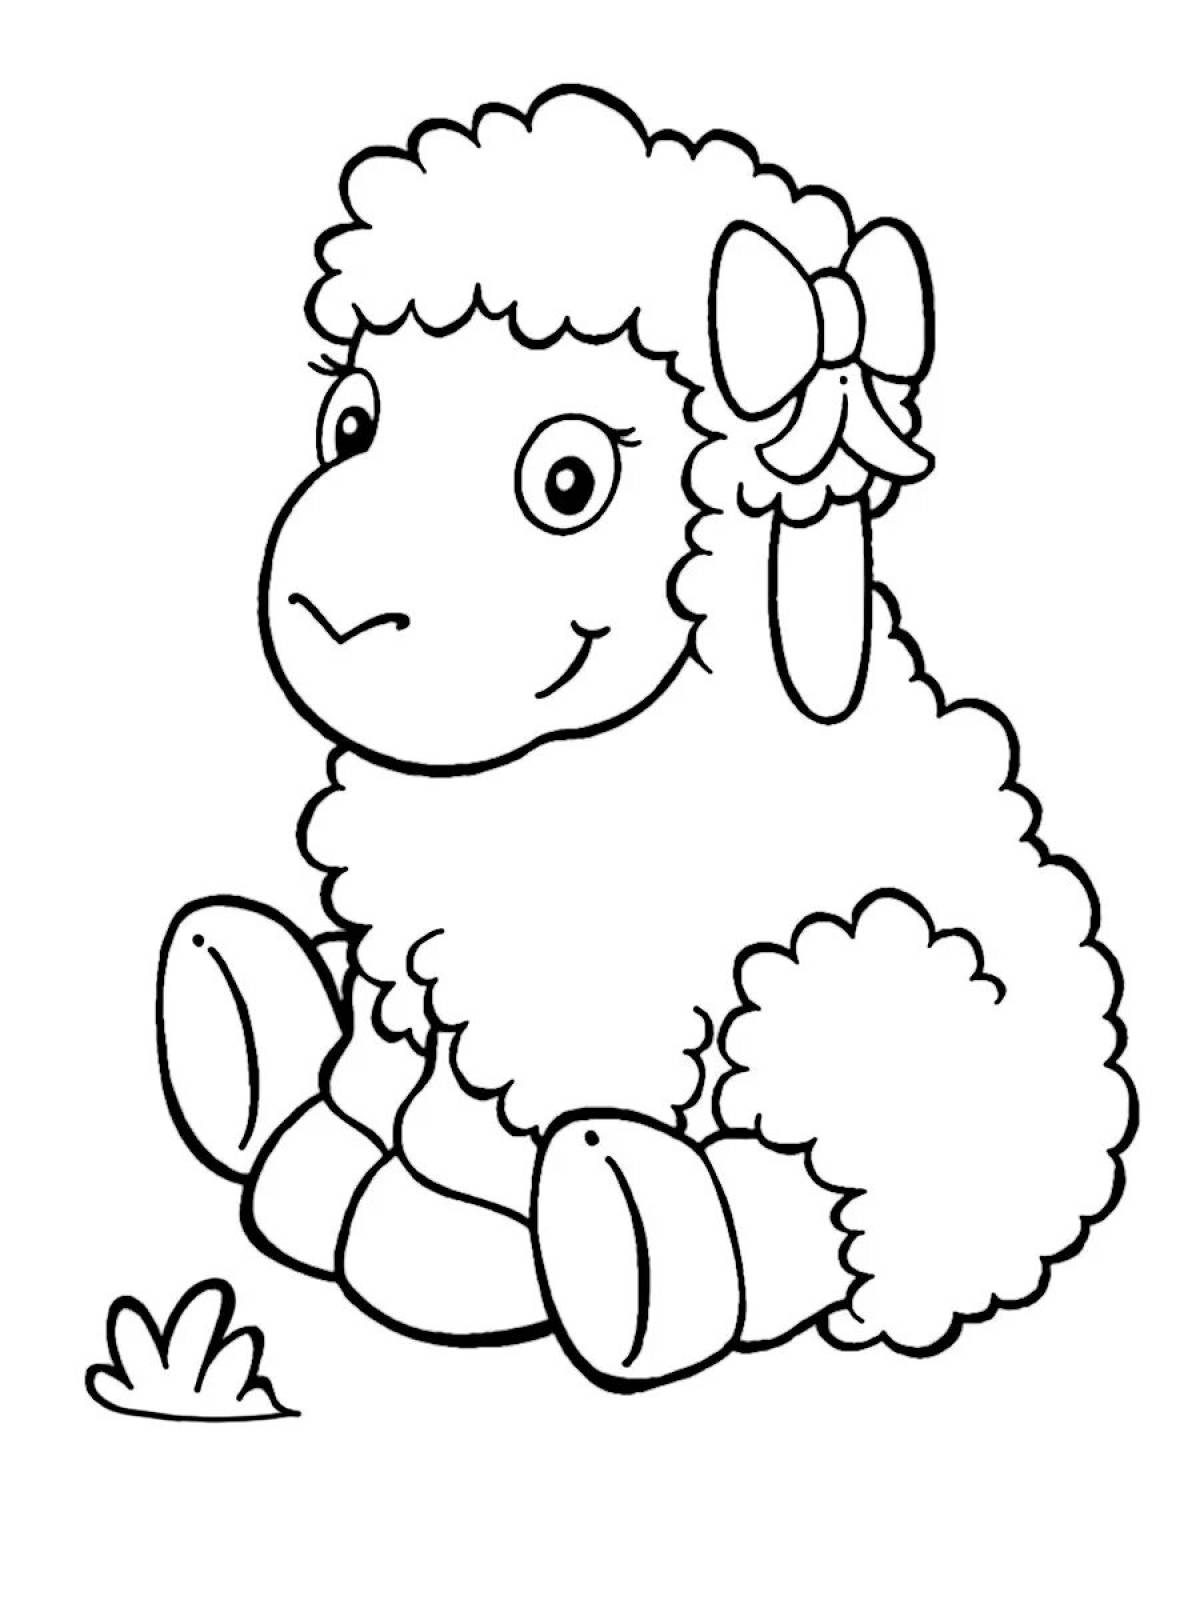 Fluffy sheep coloring book for children 2-3 years old